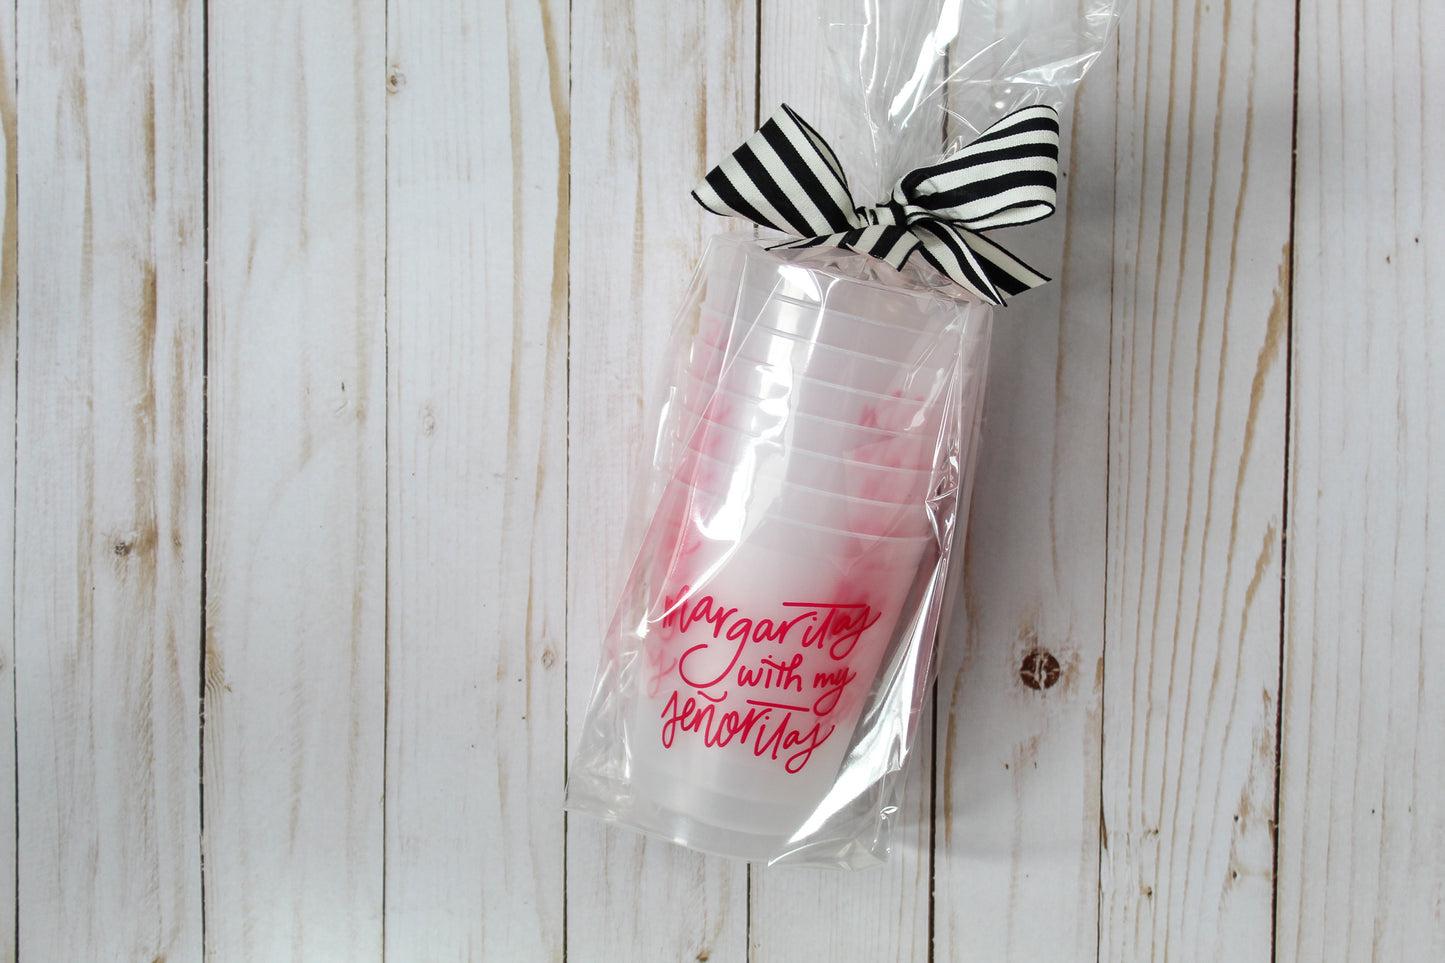 The "Margaritas With My Senoritas" Party Cups are perfect for your next girls night or bachelorette party! Best of all, you can use these time and time again - they're dishwasher safe! Cups come in a cellophane sleeve with a black and white striped ribbon tied in a bow at the top. 